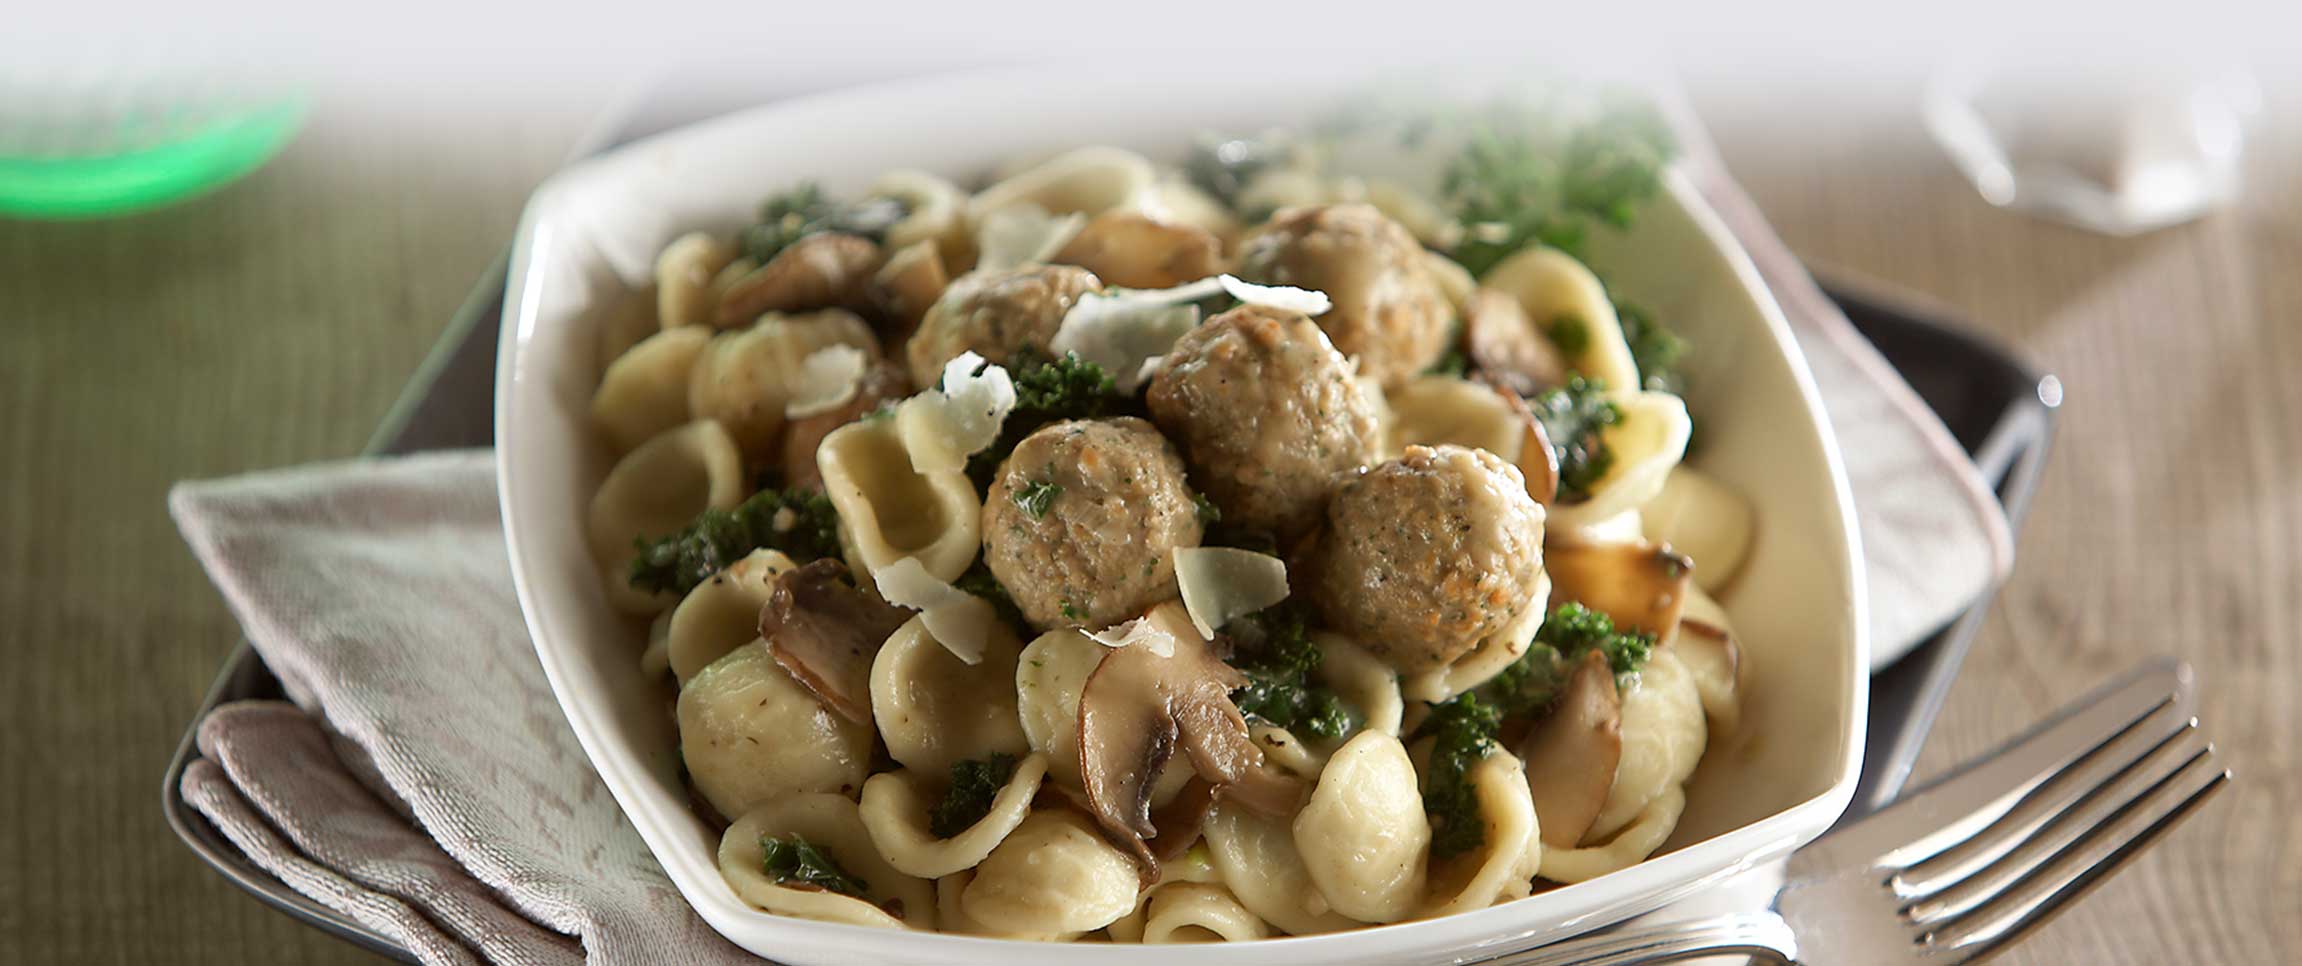 Orecchiette Pasta with Garlic, Mushrooms, Kale and Roma Gourmet Beef and Pork Meatballs